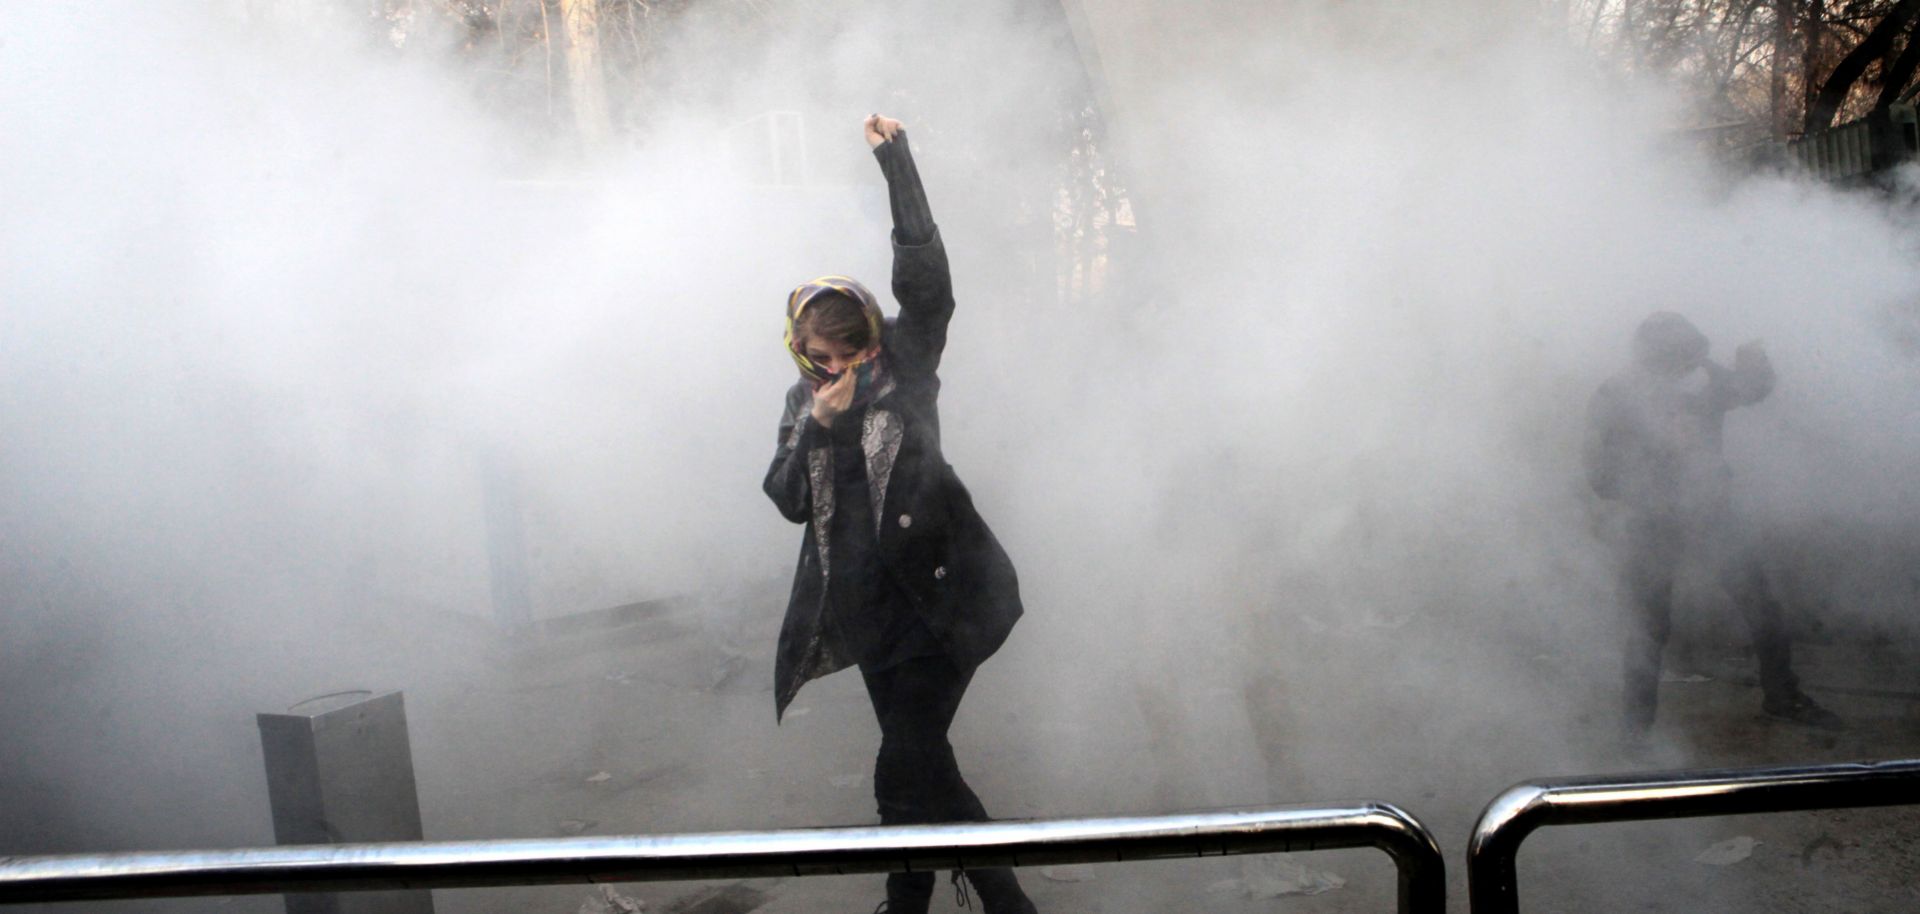 An Iranian woman raises her fist amid the smoke of tear gas at the University of Tehran during a protest in the capital, Tehran, on Dec. 30, 2017.